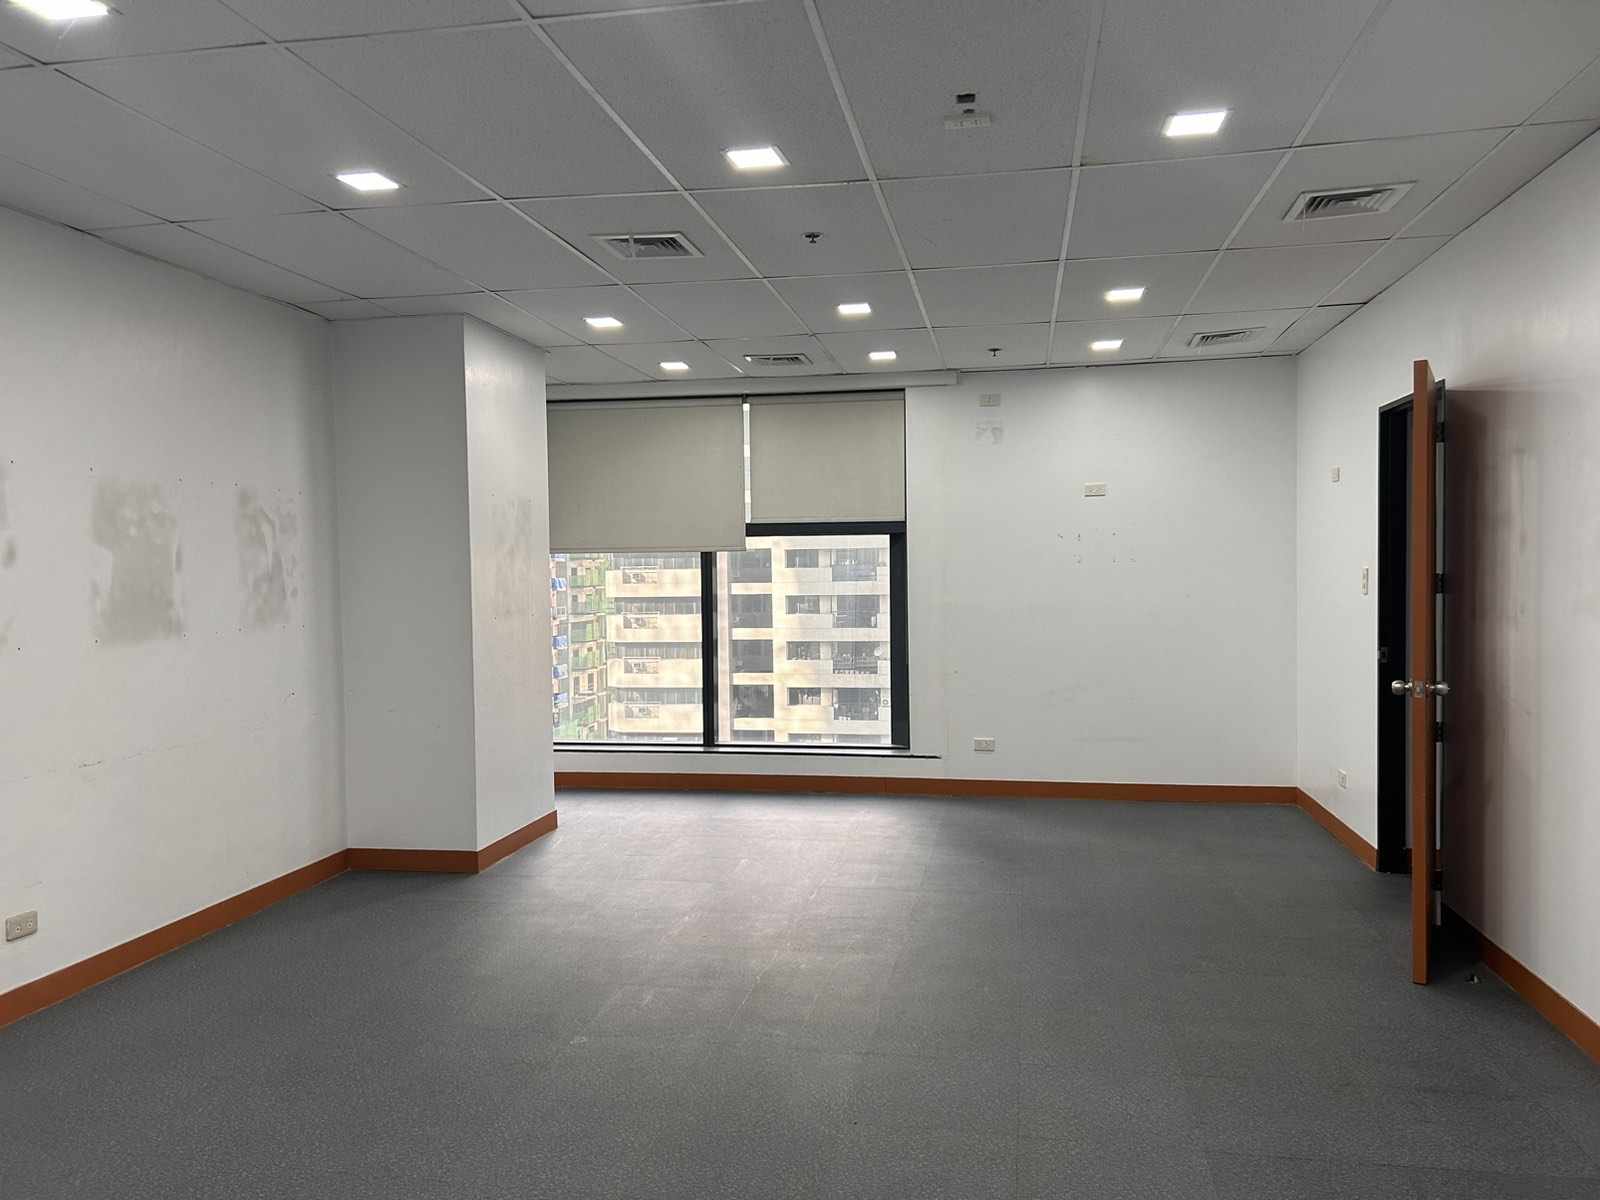 For Rent Lease Semi Furnished 229 sqm Office Space Ortigas